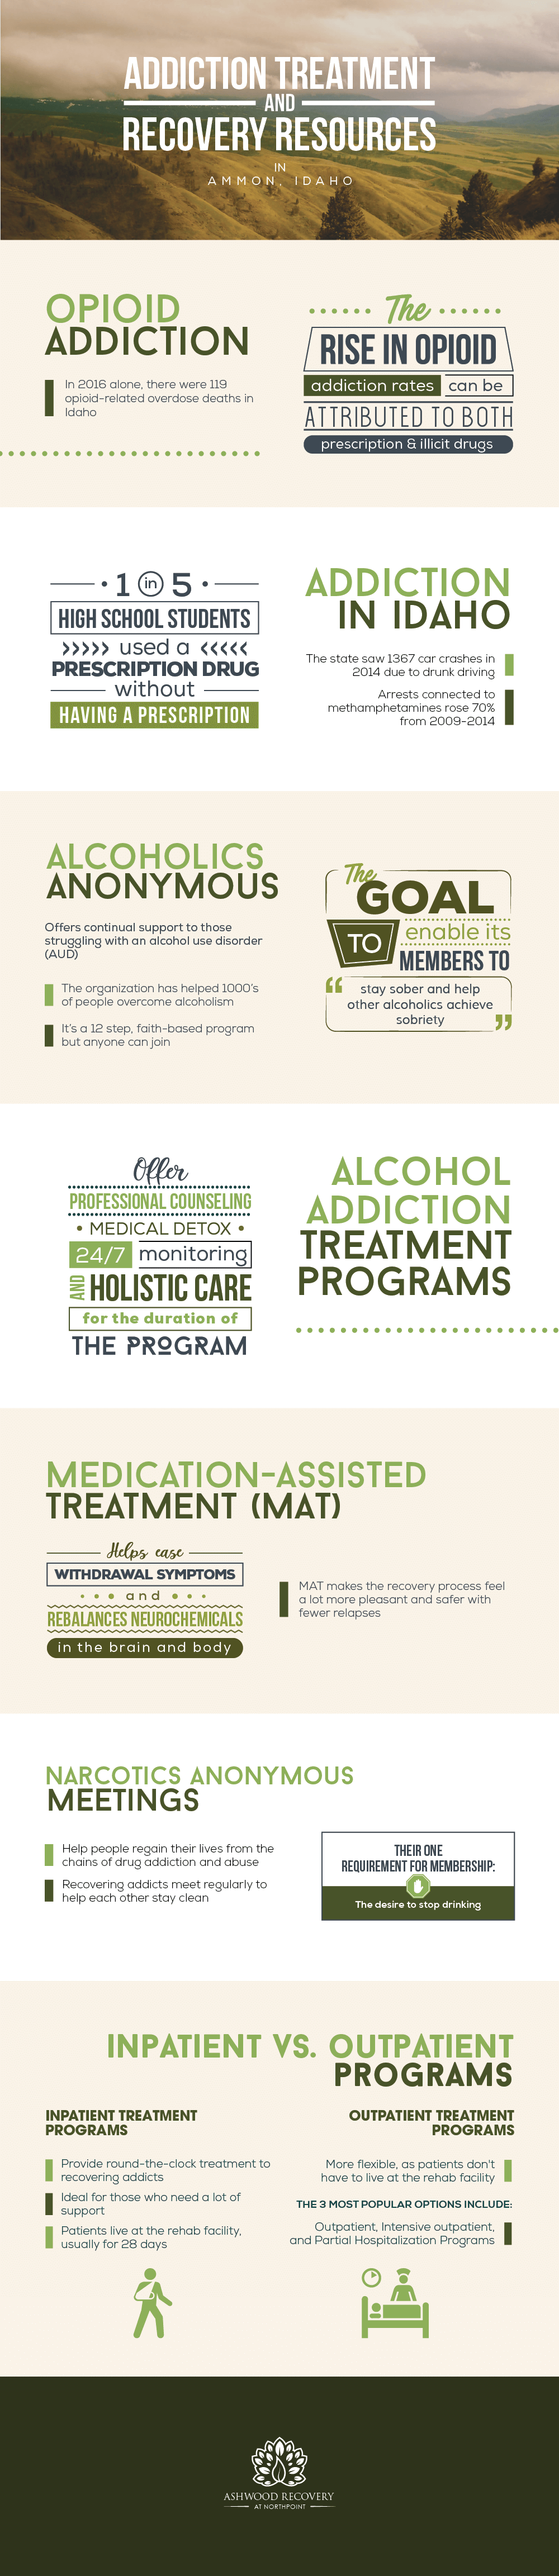 Addiction treatment and recovery resources in Ammon, Idaho. In 2016 alone, there were 119 opioid related overdose deaths in Idaho. The rise in opioid addiction rates can be attributed to both prescription and illicit drugs. In idaho 1 in 5 high school students used a prescription drug without having a prescription, the state saw 1367 car crashes in 2014 due to drunk driving, arrests connected to methamphetamines rose 70 percent from 2009 to 2014. Alcohol addiction treatment programs offer professional counseling, medical detox, 24 hours each day monitoring and holistic care for the duration of the program. Alcoholics anonymous offers continual support to those struggling with an alcohol use disorder, the organization has helped thousands of people overcome alcoholism, it is a 12 step, faith based program but anyone can join, the goal is to enable its members to stay sober and help other alcoholics achieve sobriety. Medication assisted treatment (MAT) helps ease withdrawal symptoms and rebalances neurochemicals in the brain and body, MAT makes the recovery process feel a lot more pleasnt and safer with fewer relapses. Narcotics anonymous meetings help people regain their lives from the chains of drug addiction and abuse, recovering addicts meet regularly to help each other stay clean, their one requirement for membership is the desire to stop drinking. Inpatient treatment programs provide round-the-clock treatment to recovering addicts, are ideal for those who need a lot of support, in this type of treatments patients live at the rehab facility usually for 28 days. Outpatient treatment programs are more flexible, as patients do not have to live at the rehab facility, the most popular options of outpatient treatment programs include outpatient, intensive outpatient and partial hospitalization programs